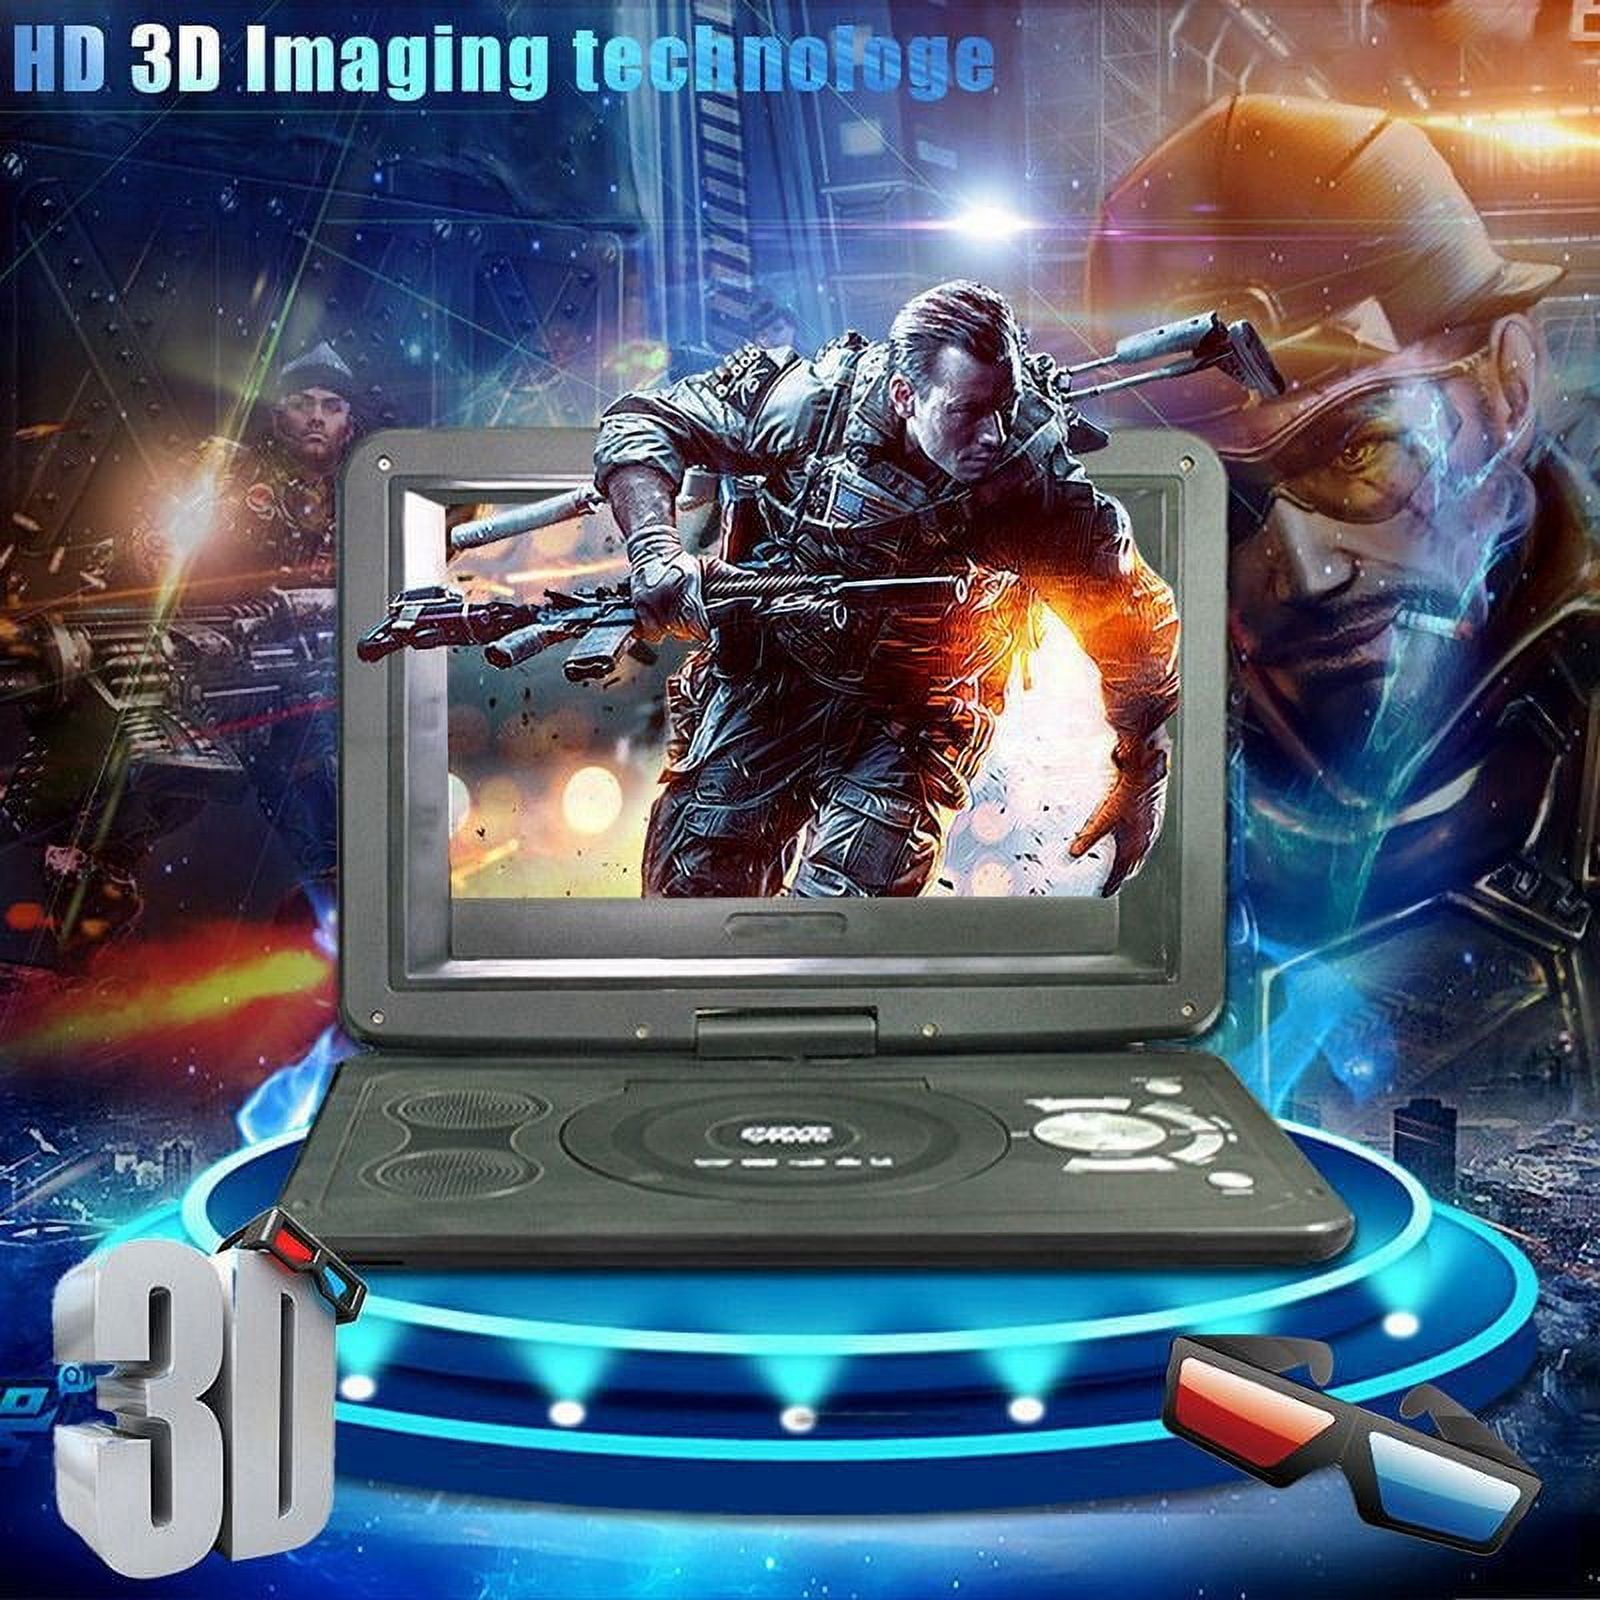 Reproductor DVD + TDT 476030, multiformato, TDT HD, USB reproductor, hdmi